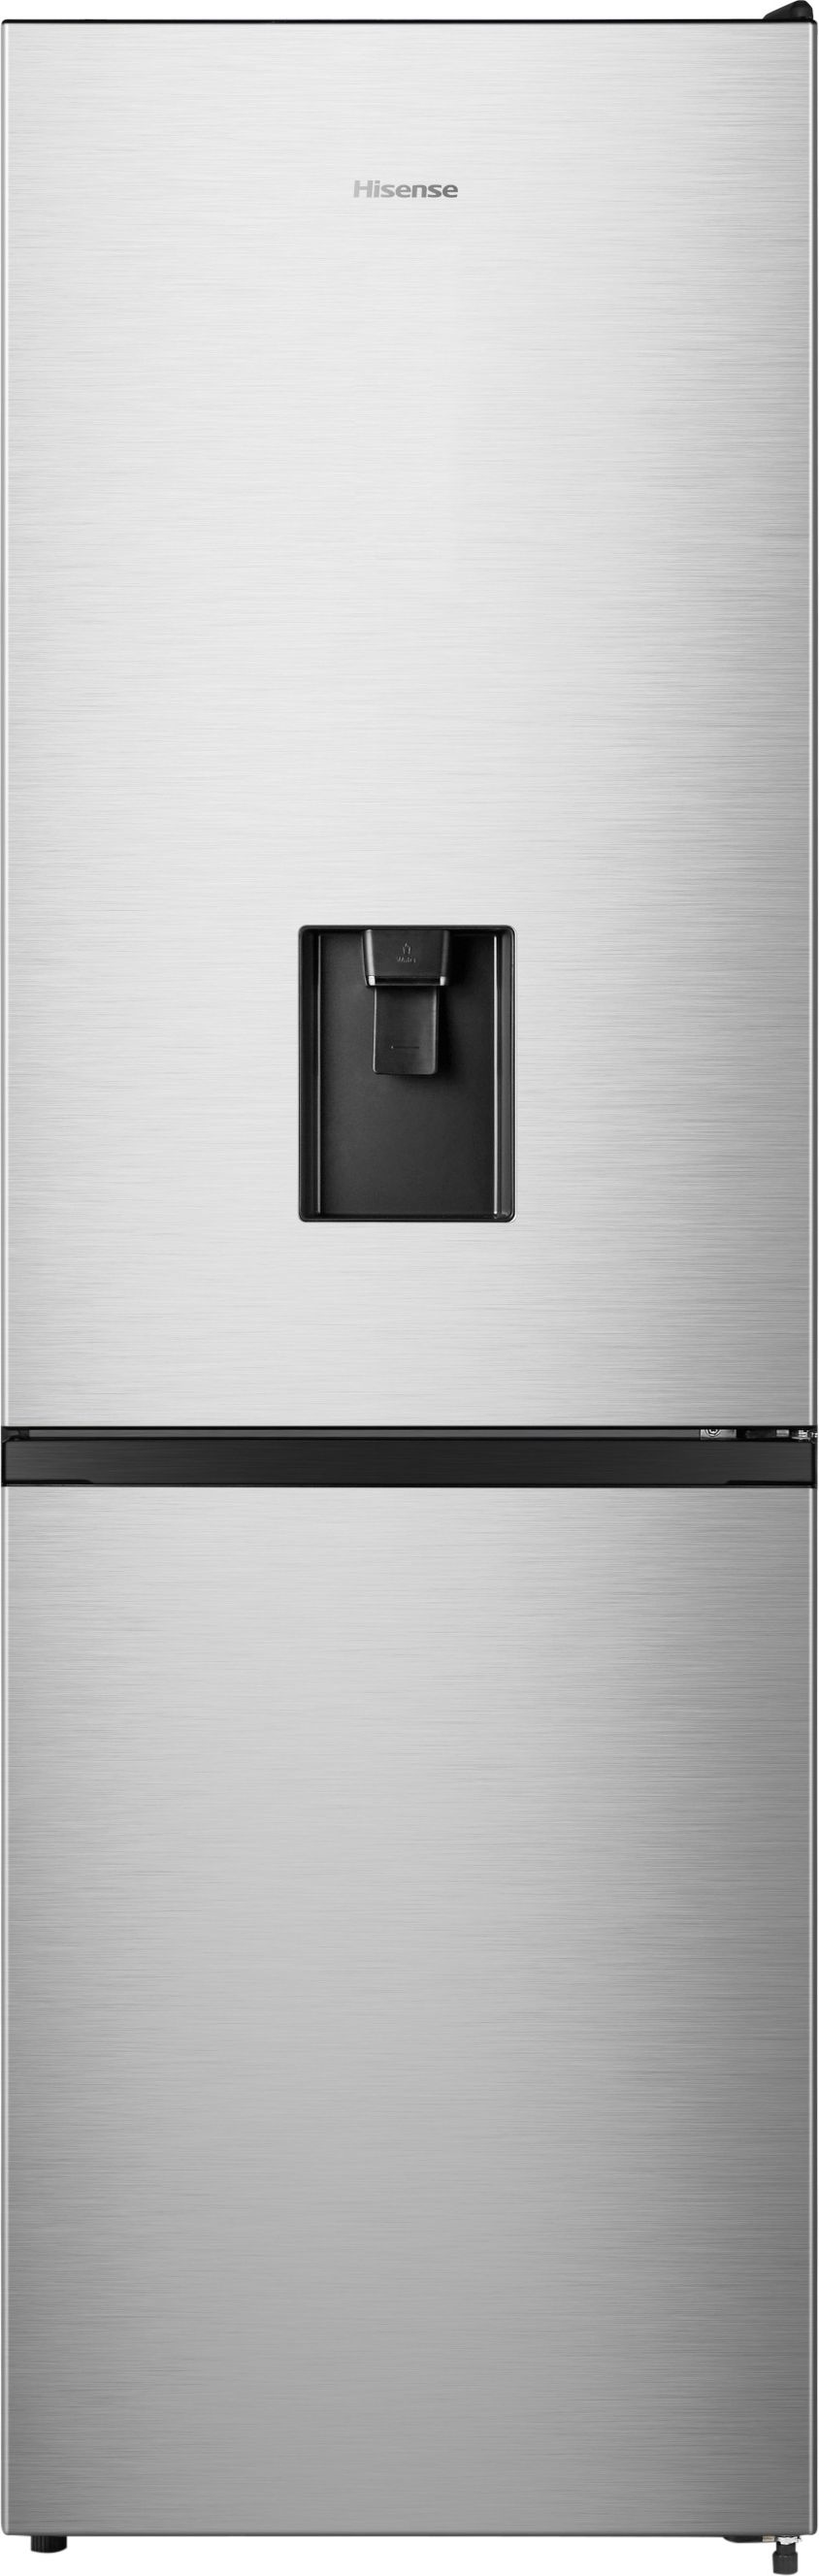 Hisense RB390N4WCE 60/40 No Frost Fridge Freezer - Stainless Steel - E Rated, Stainless Steel